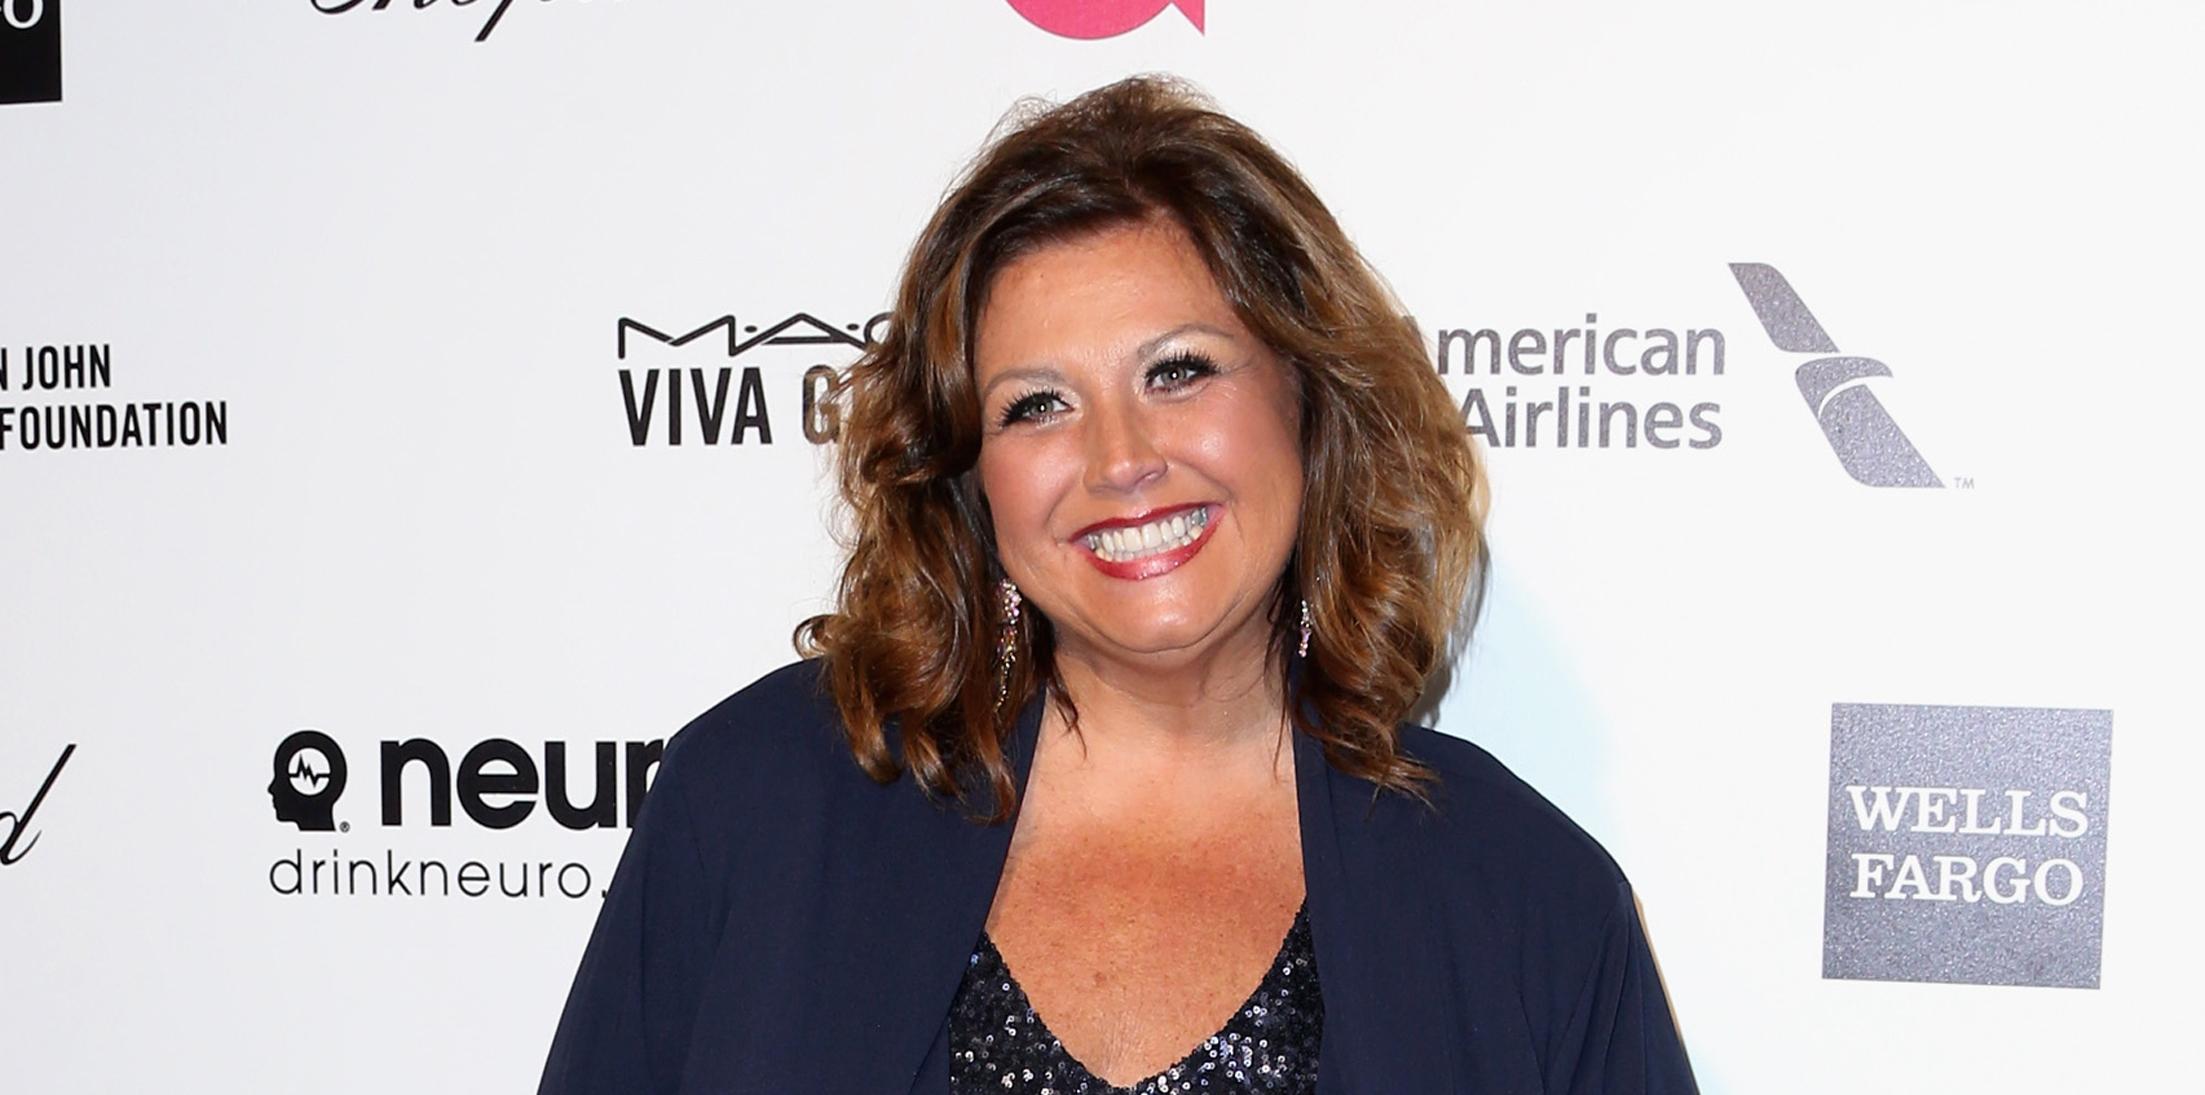 Crimson Hoax: Abby Lee Miller's return to 'Dance Moms,' this time